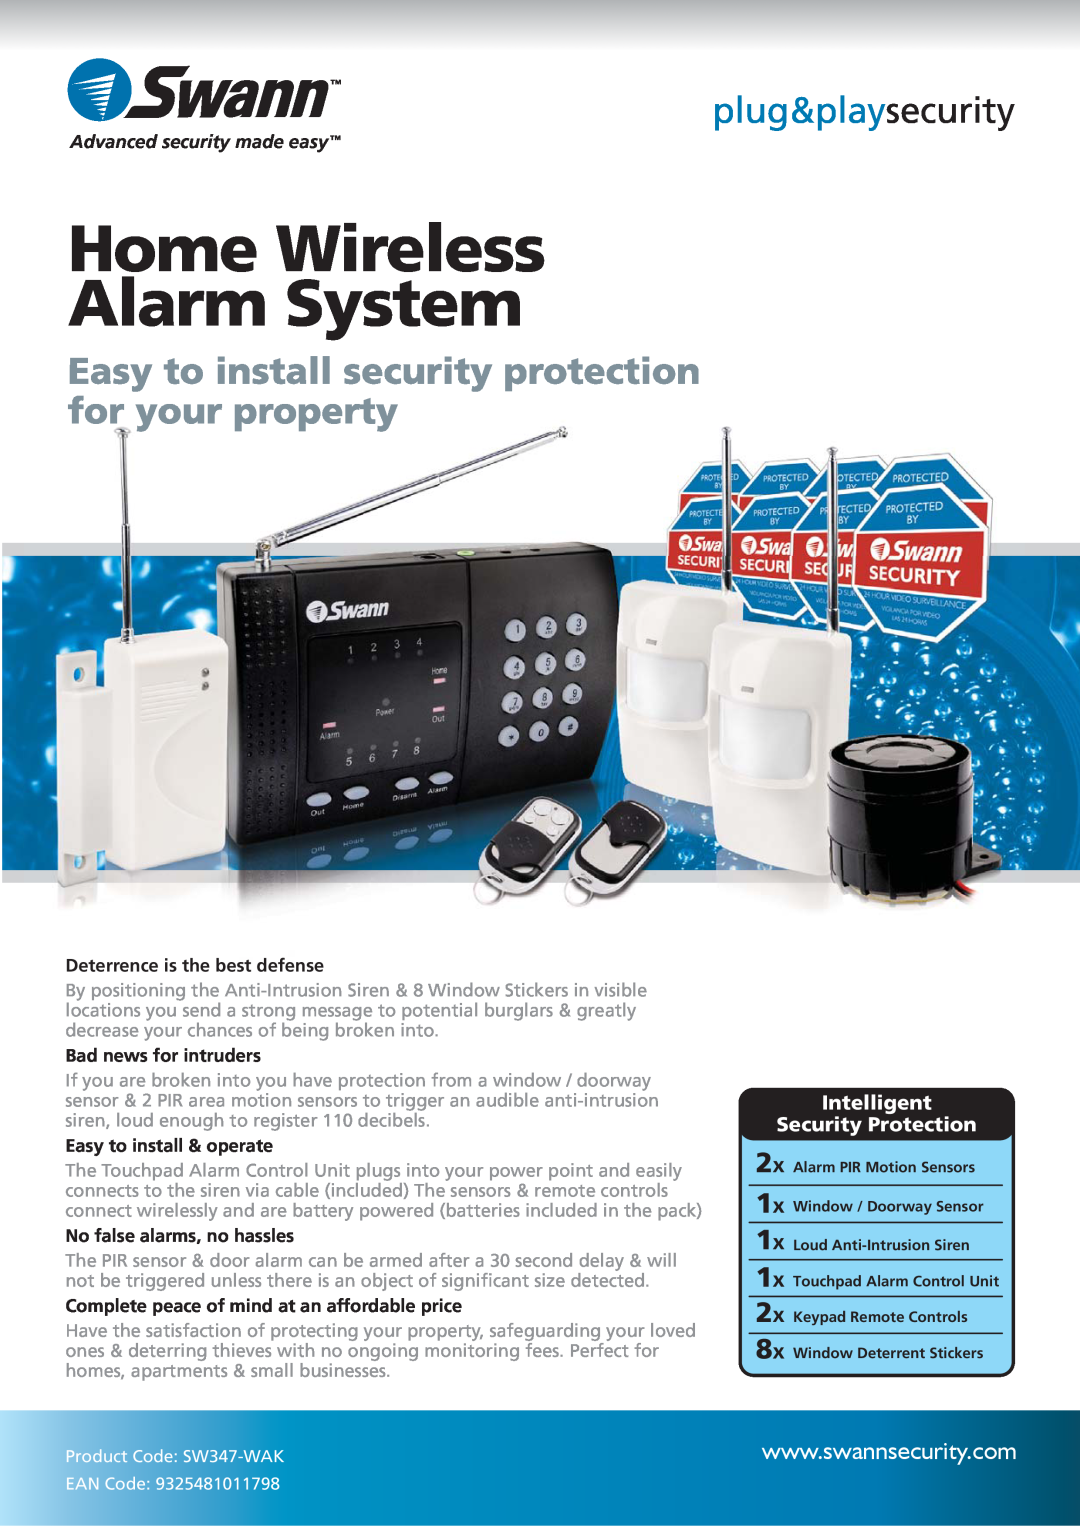 Swann SW347-WAK manual Home Wireless Alarm System, plug&playsecurity, Advanced security made easy, Bad news for intruders 